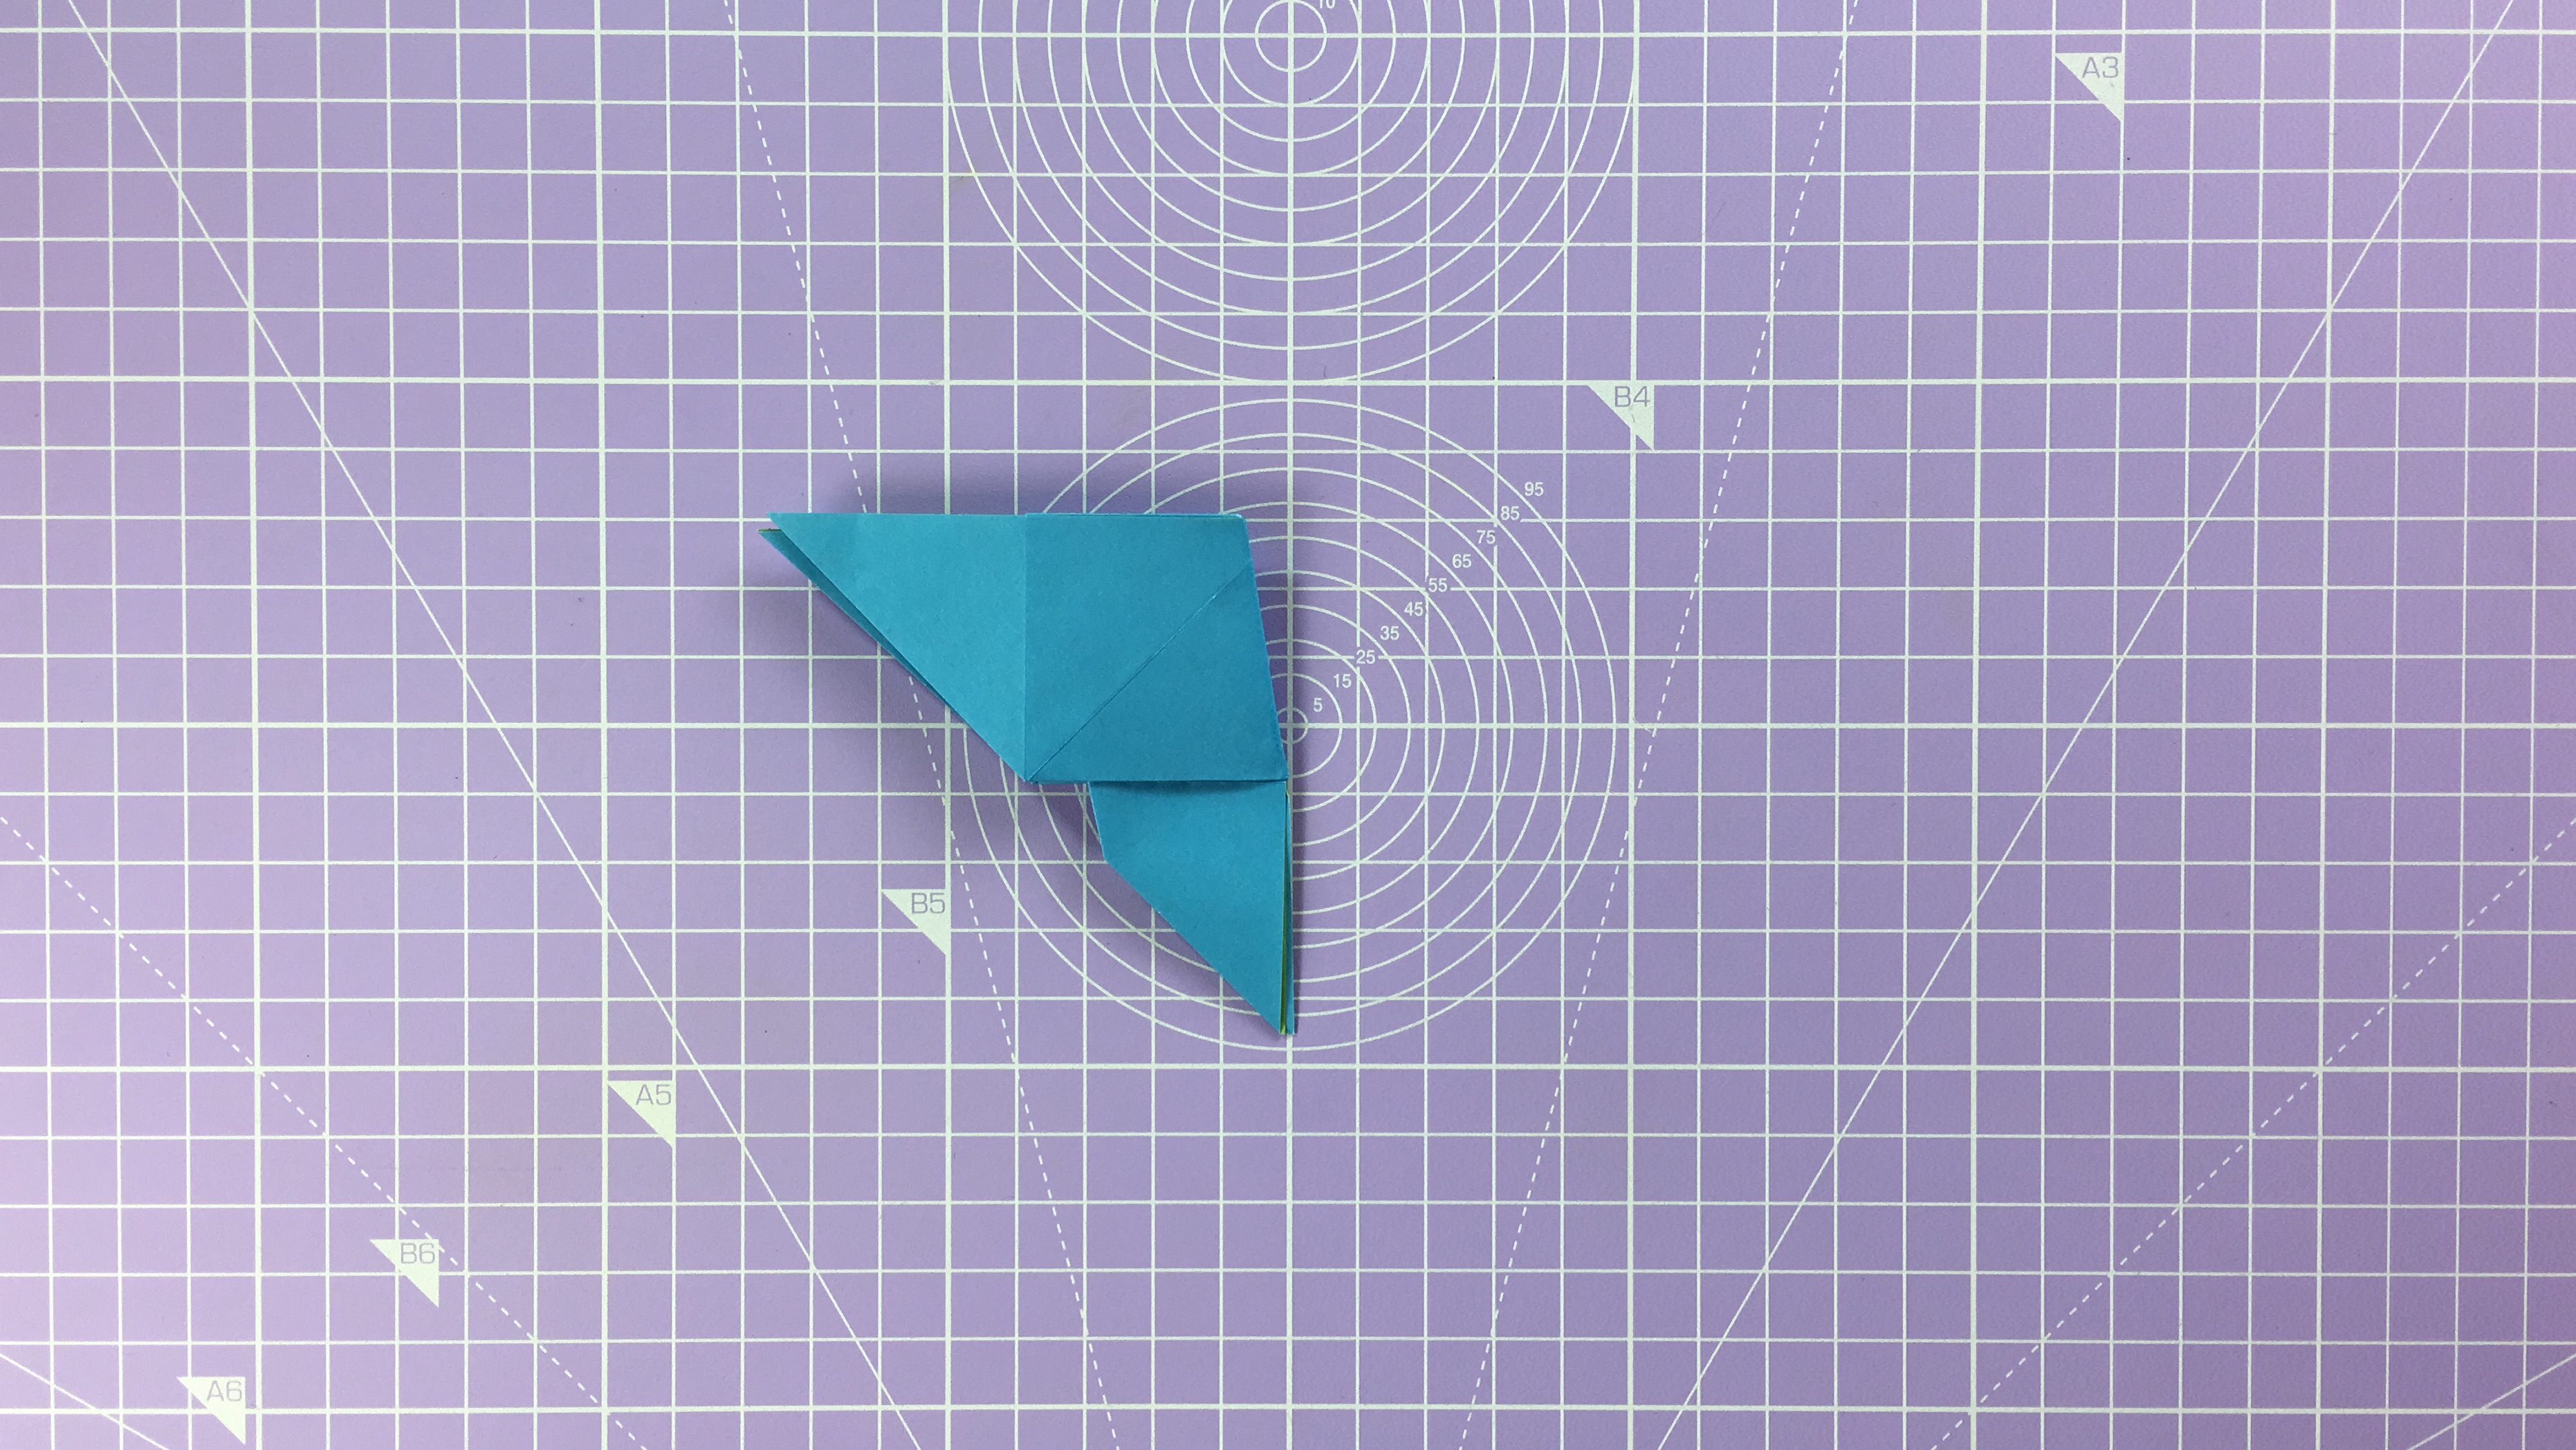 How to make an origami butterfly - step 15b